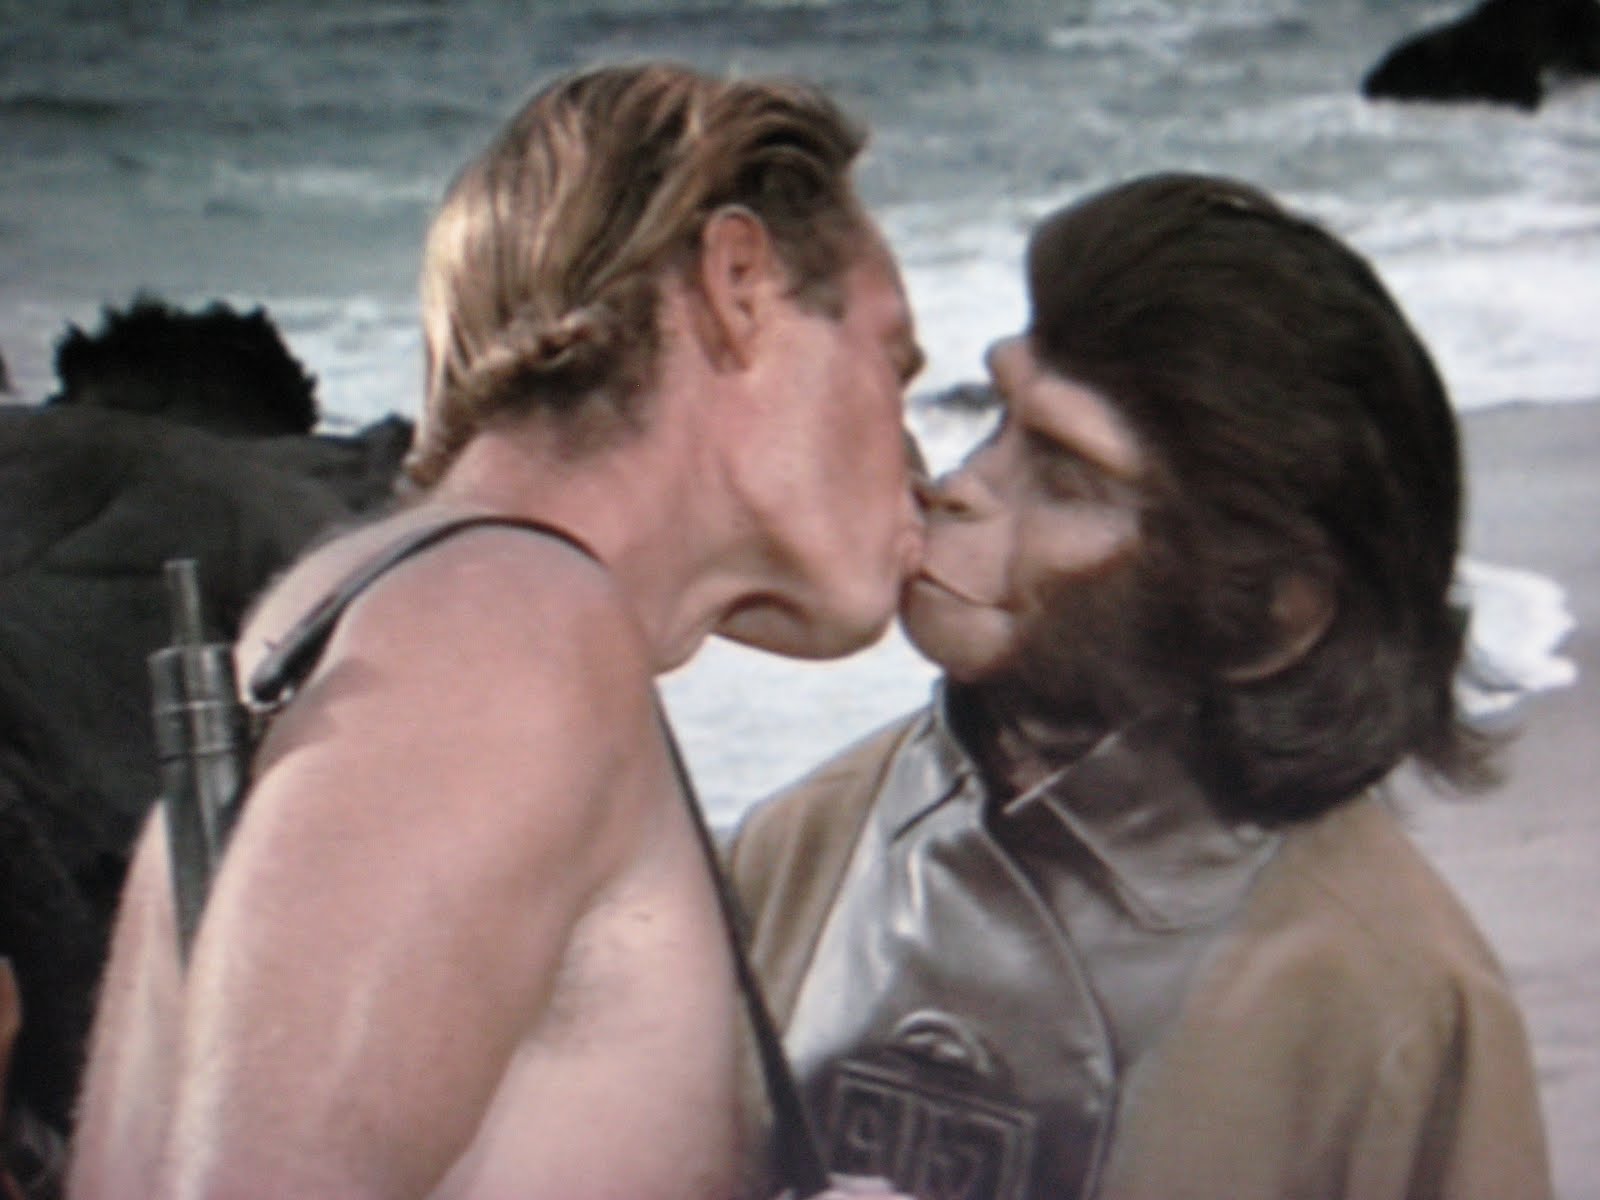 Planet-of-the-Apes-Kiss.jpg